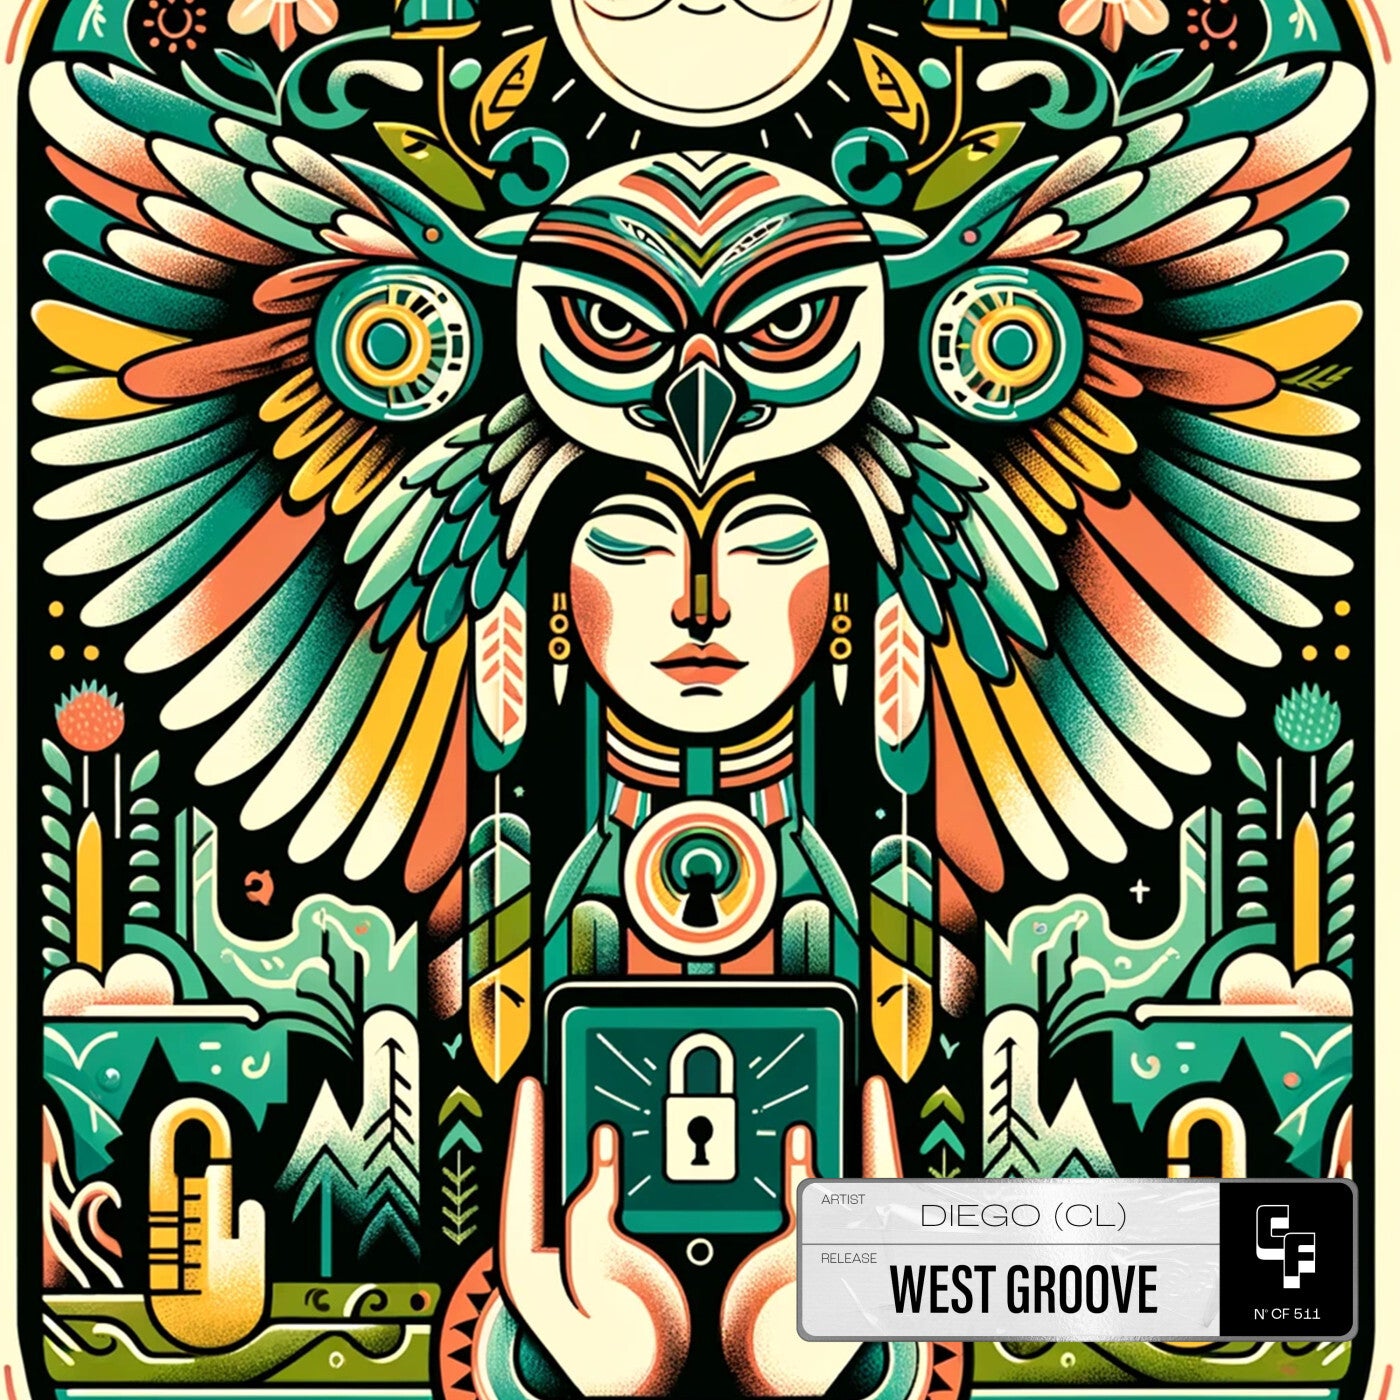 Cover - Diego (CL) - West Groove (Original Mix)